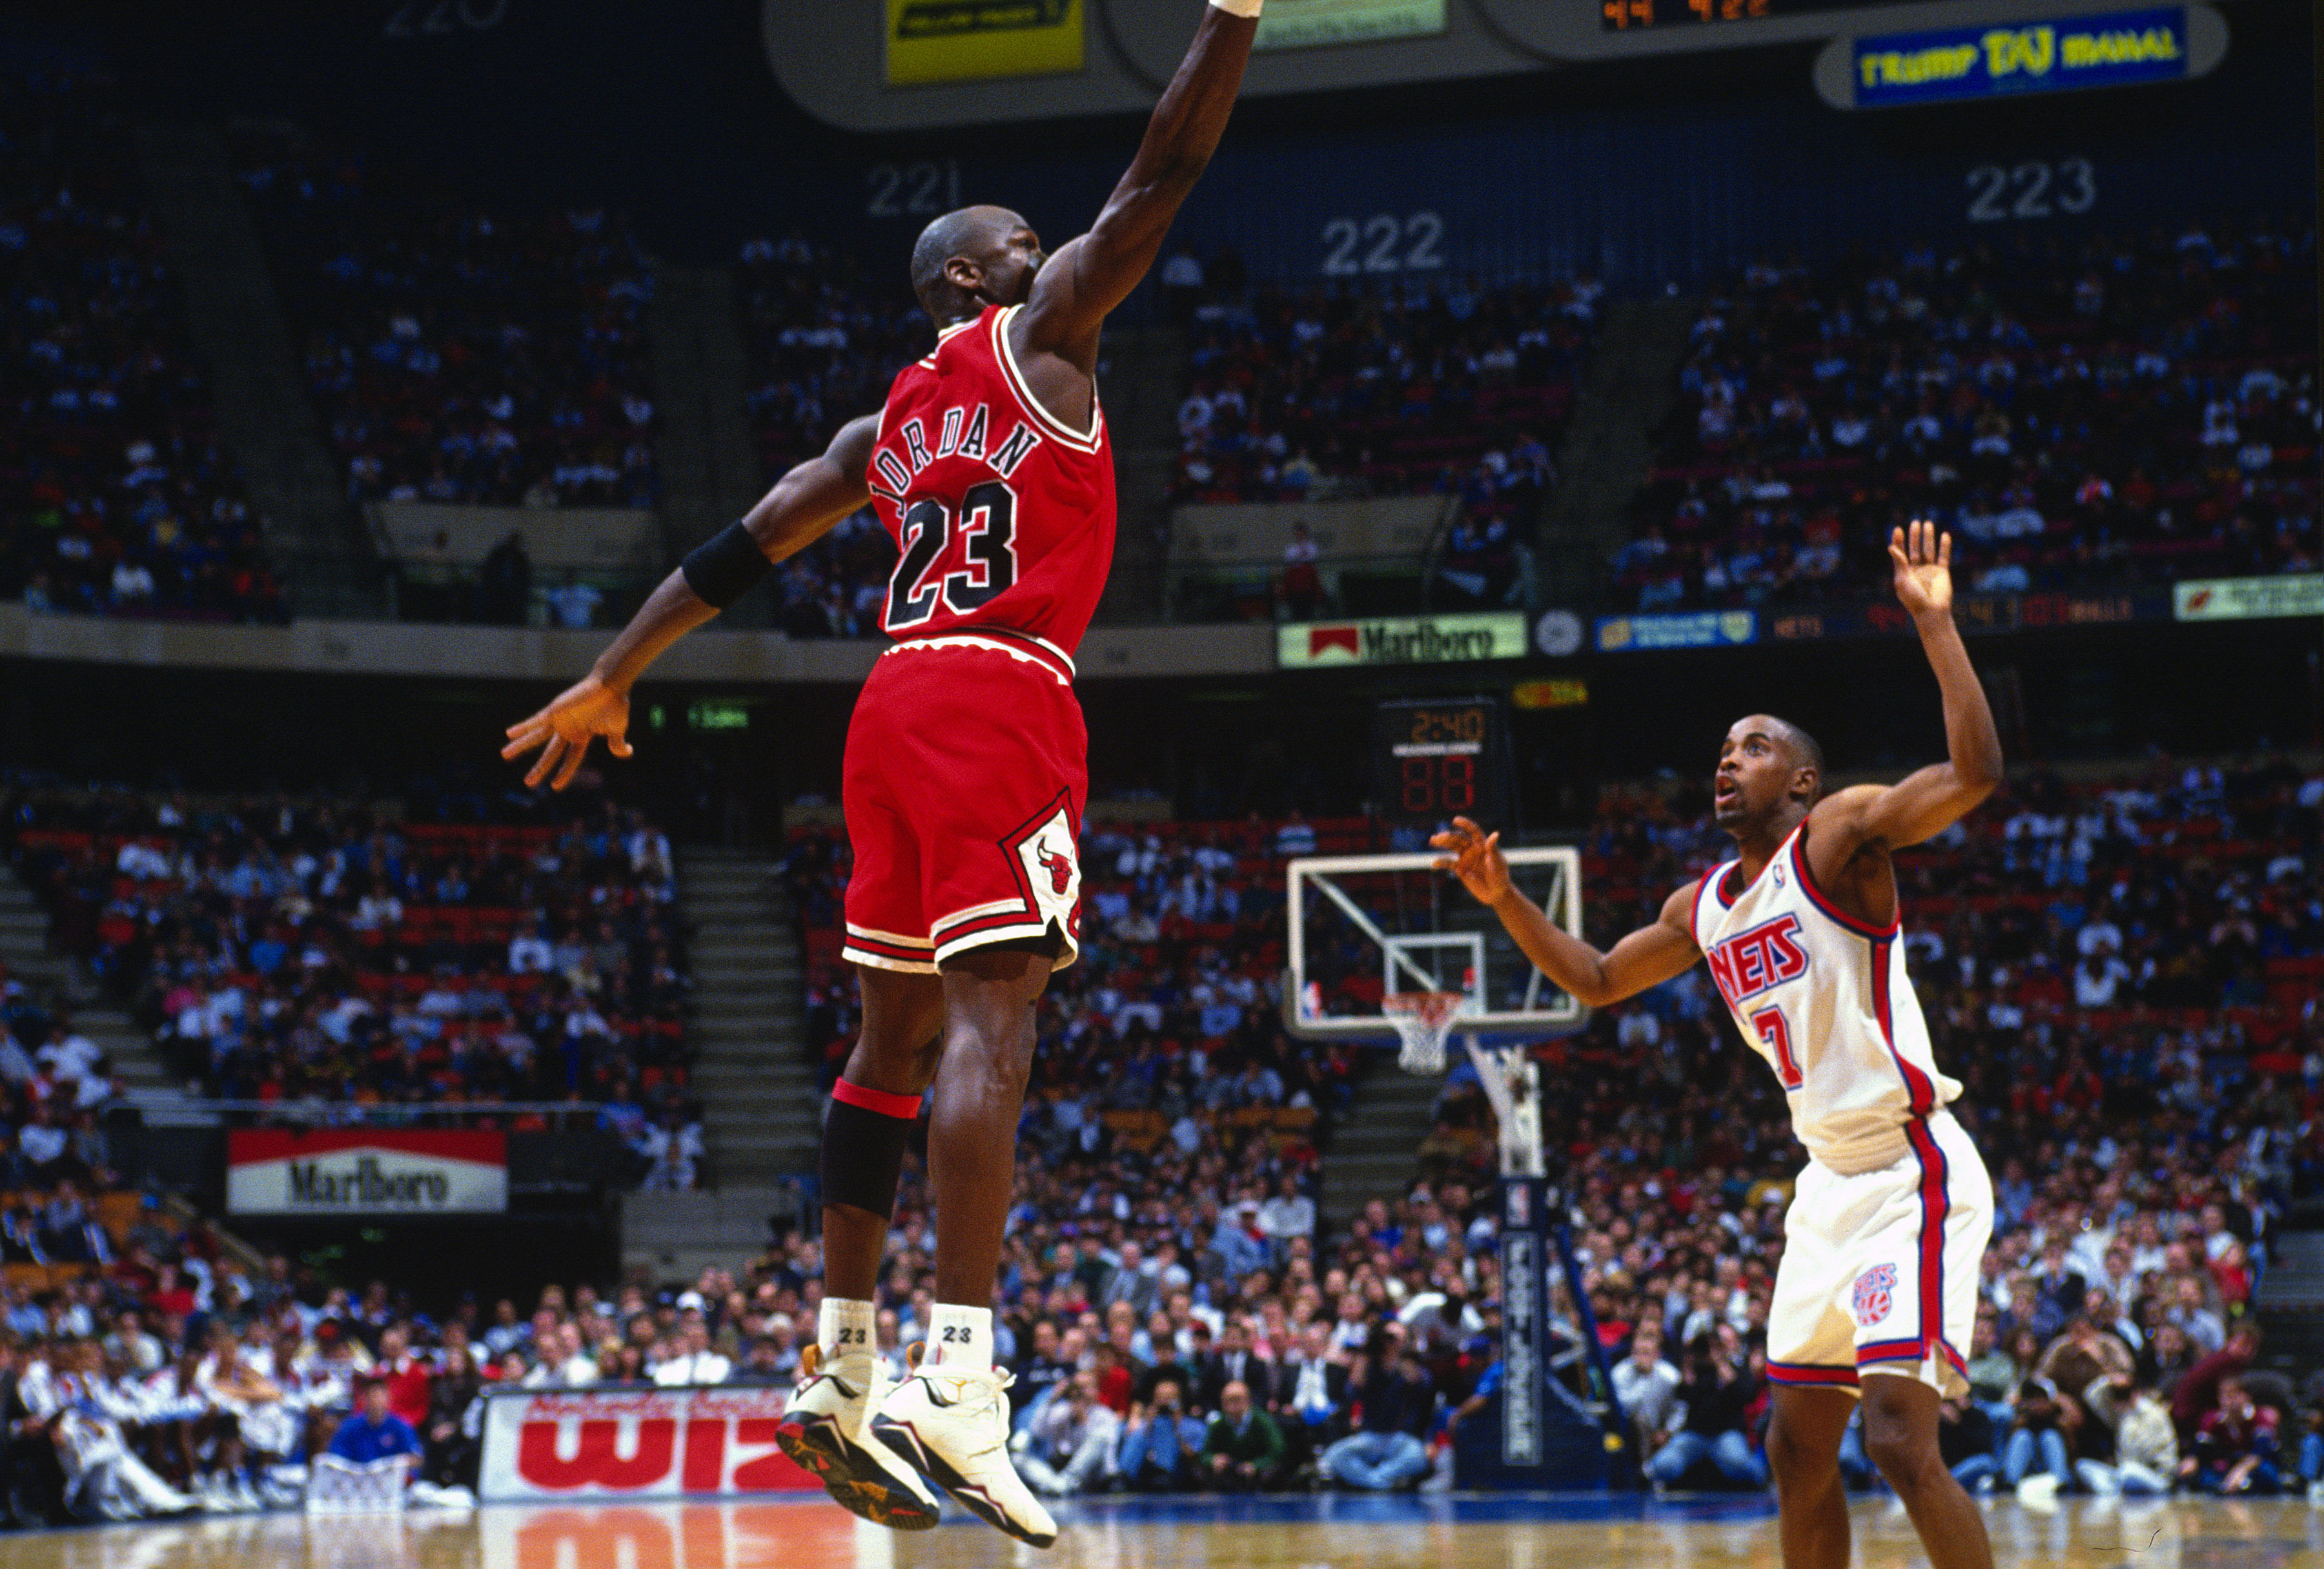 A Simple Diet Helped Keep Michael Jordan at the Top of His Game for Years